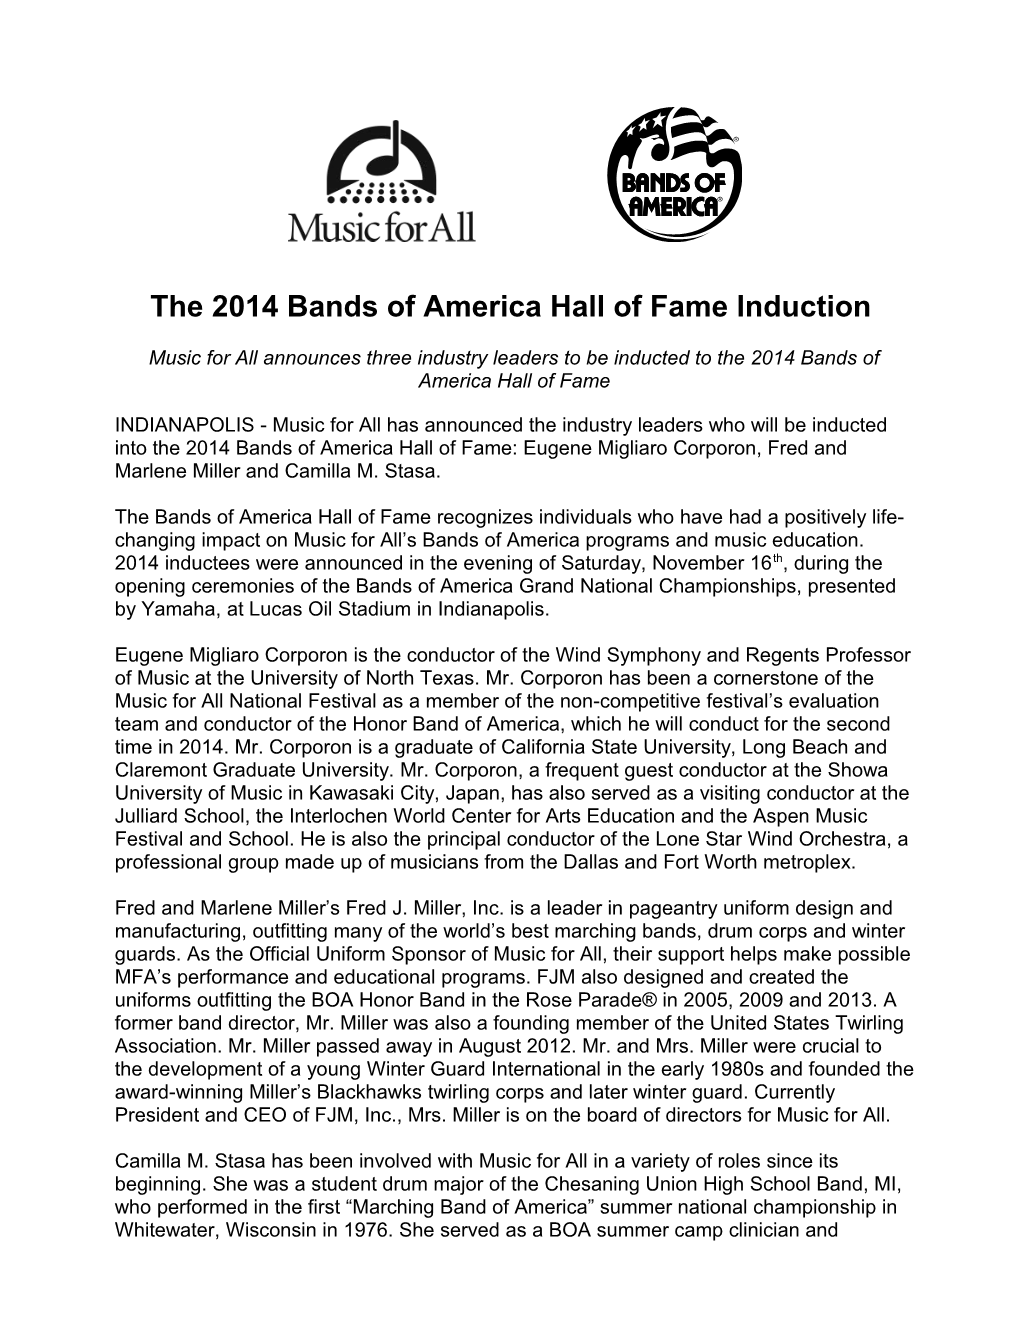 The 2014 Bands of America Hall of Fame Induction